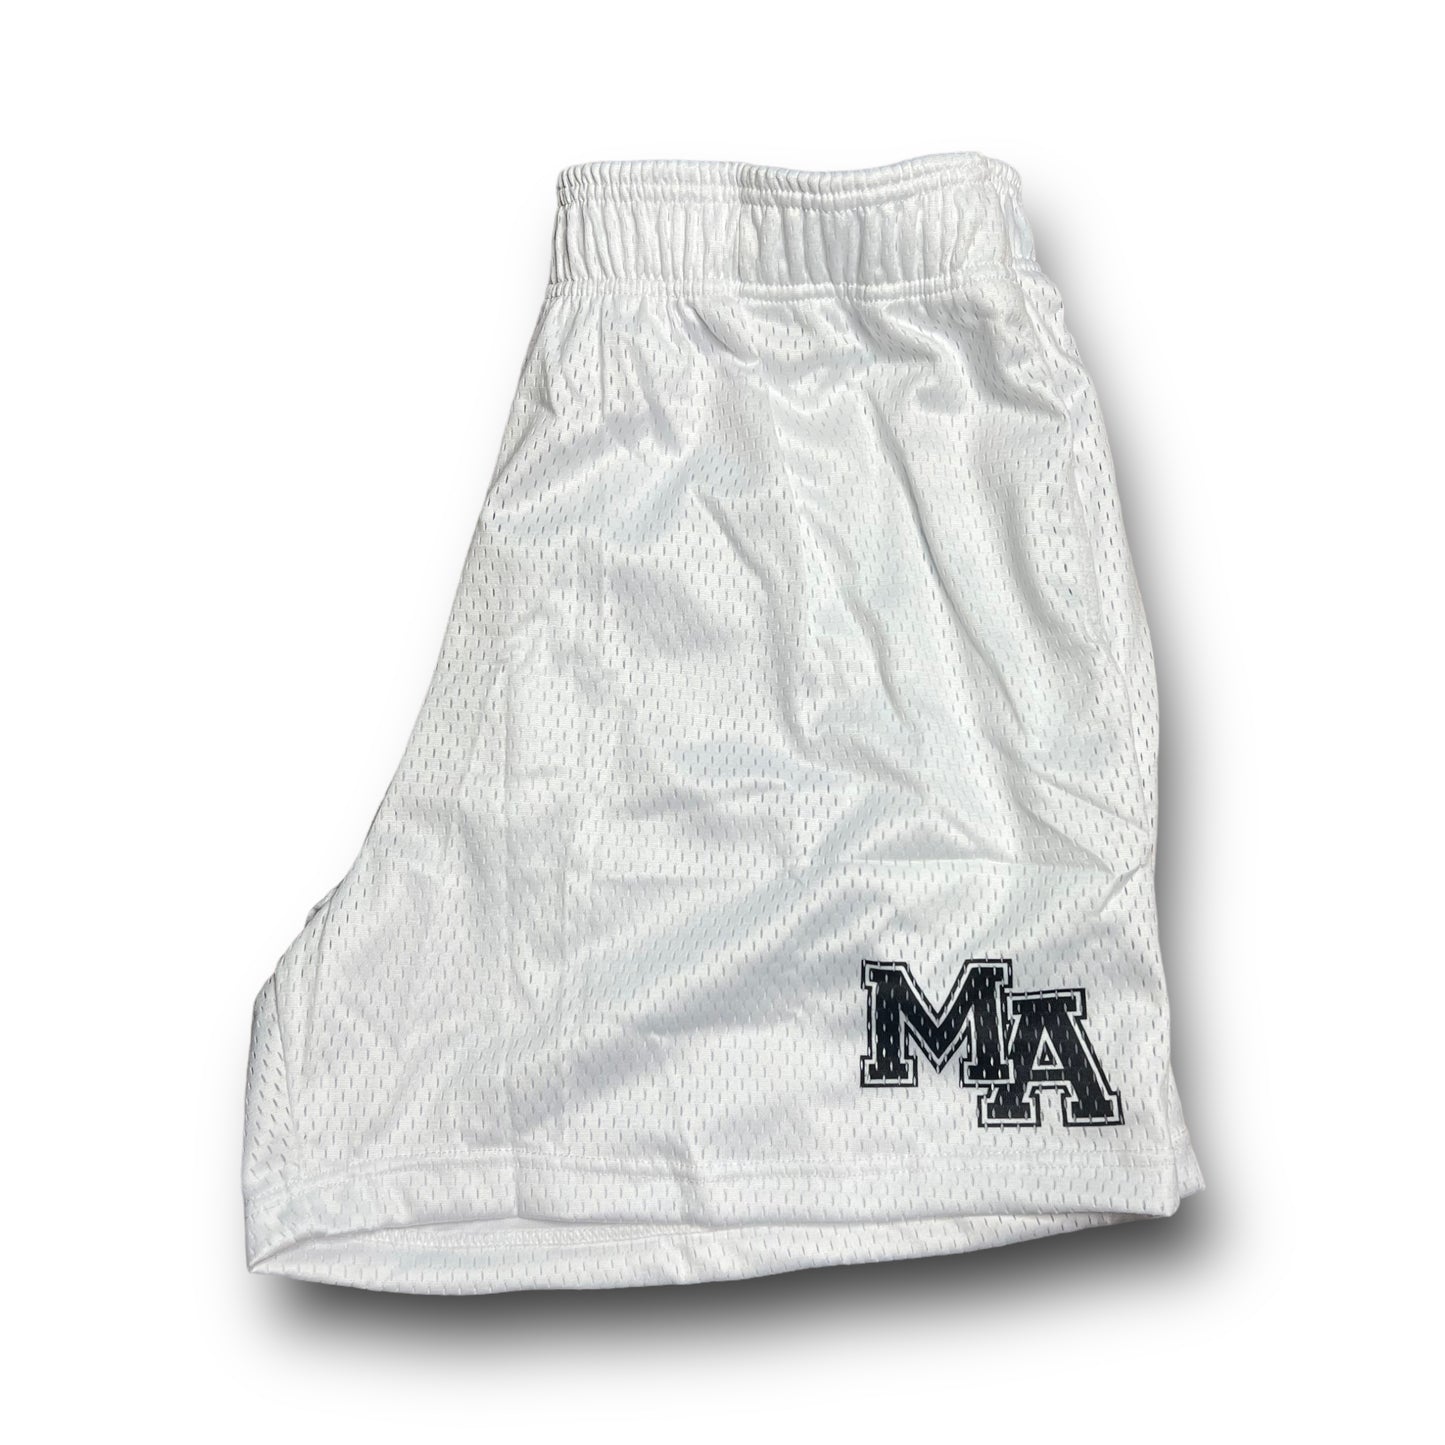 Misfitted Apparel Shorts - White